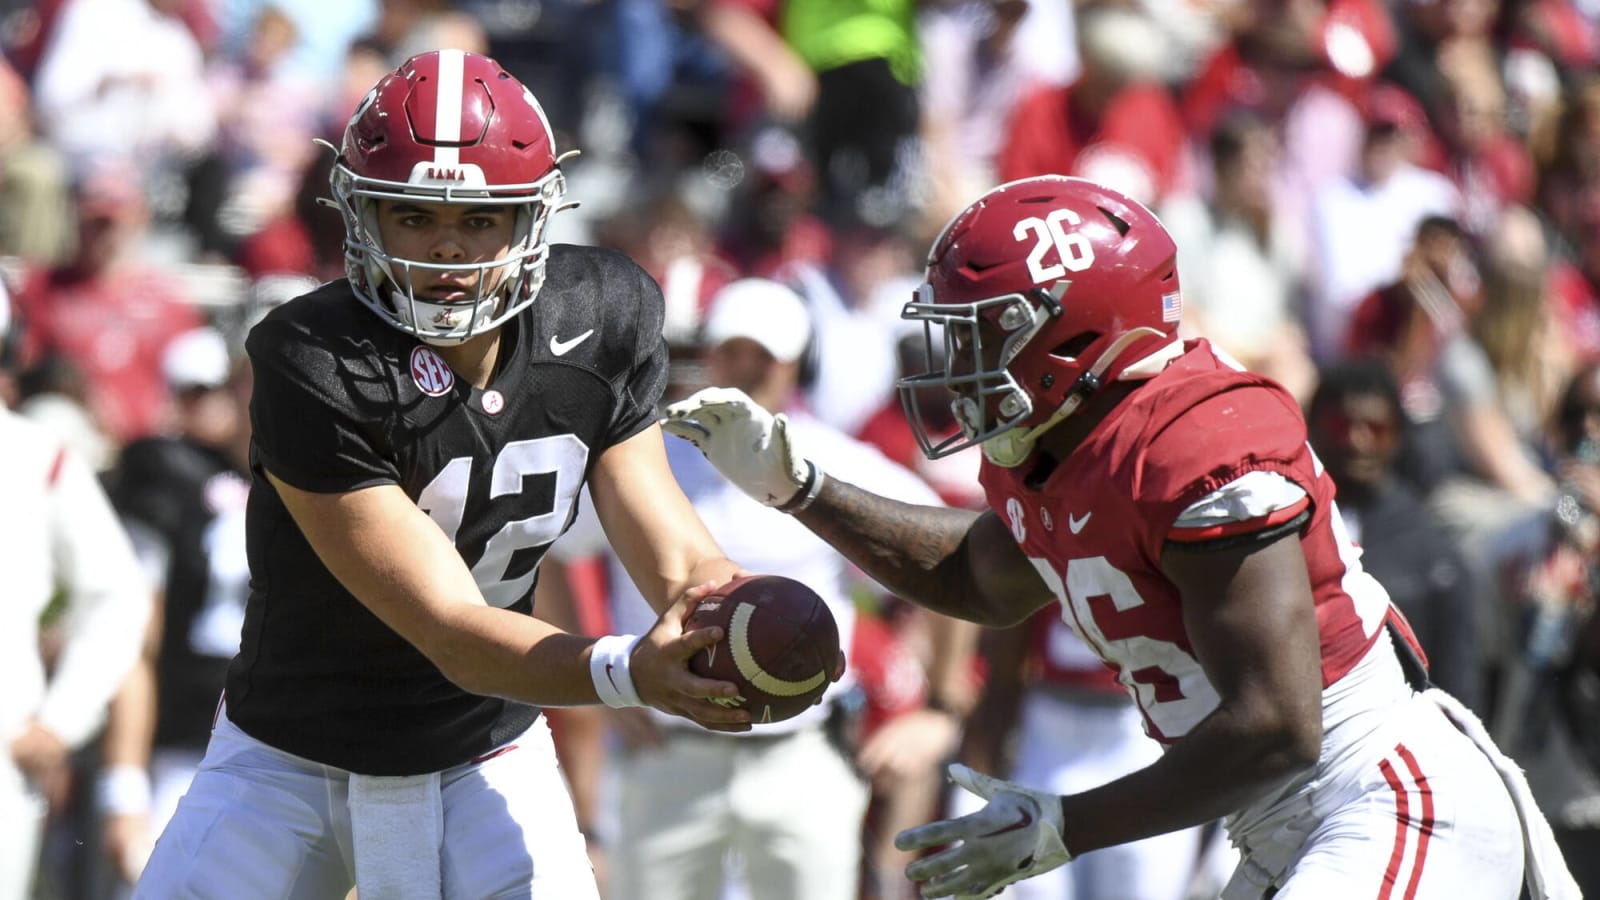 Alabama players are excited to see RB Jam Miller be impactful